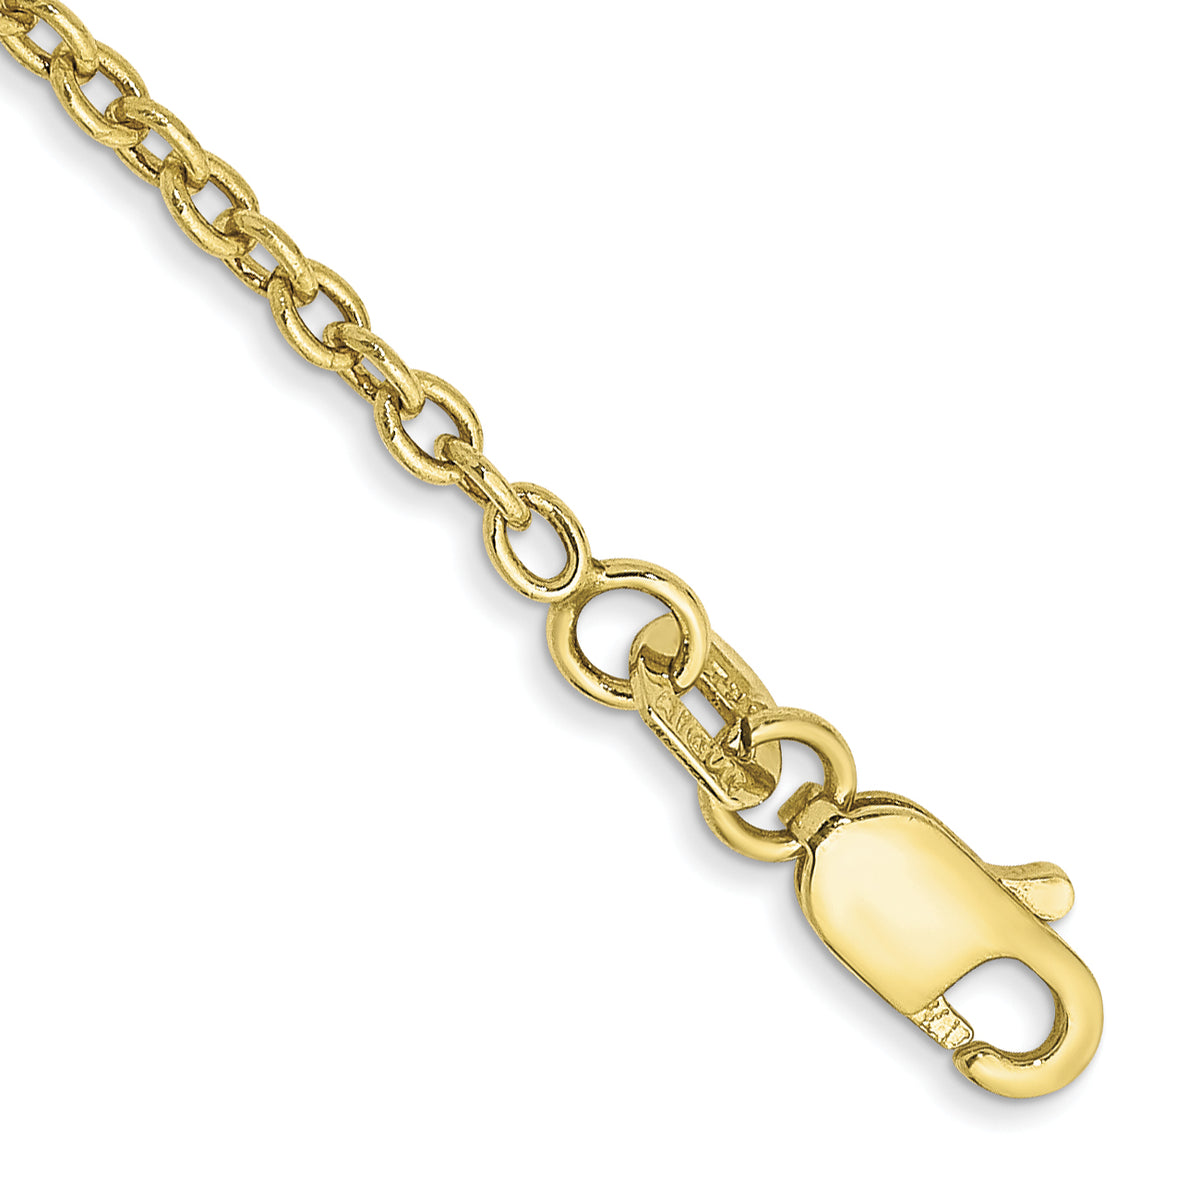 10k 1.8mm Forzantine Cable Chain Anklet